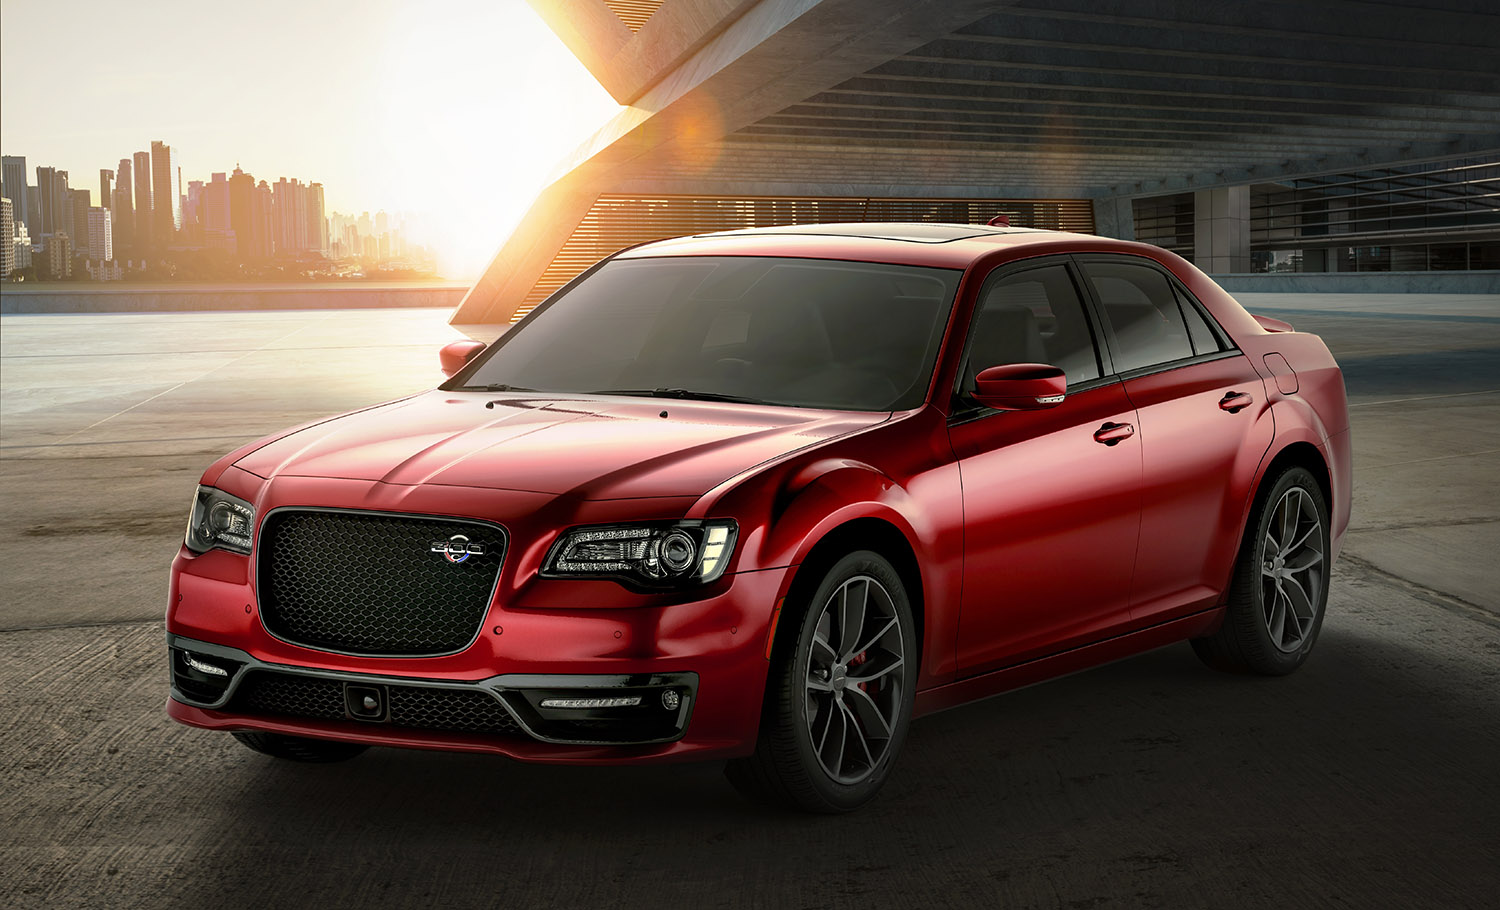 Chrysler brand is commemorating the nearly 70-year legacy of the Chrysler 300 with the 2023 Chrysler 300C, powered by a 6.4L HEMI® engine with 485-horsepower. The 2023 Chrysler 300C was revealed on September 13, 2022, on the eve of media day for the 2022 North American International Auto Show.